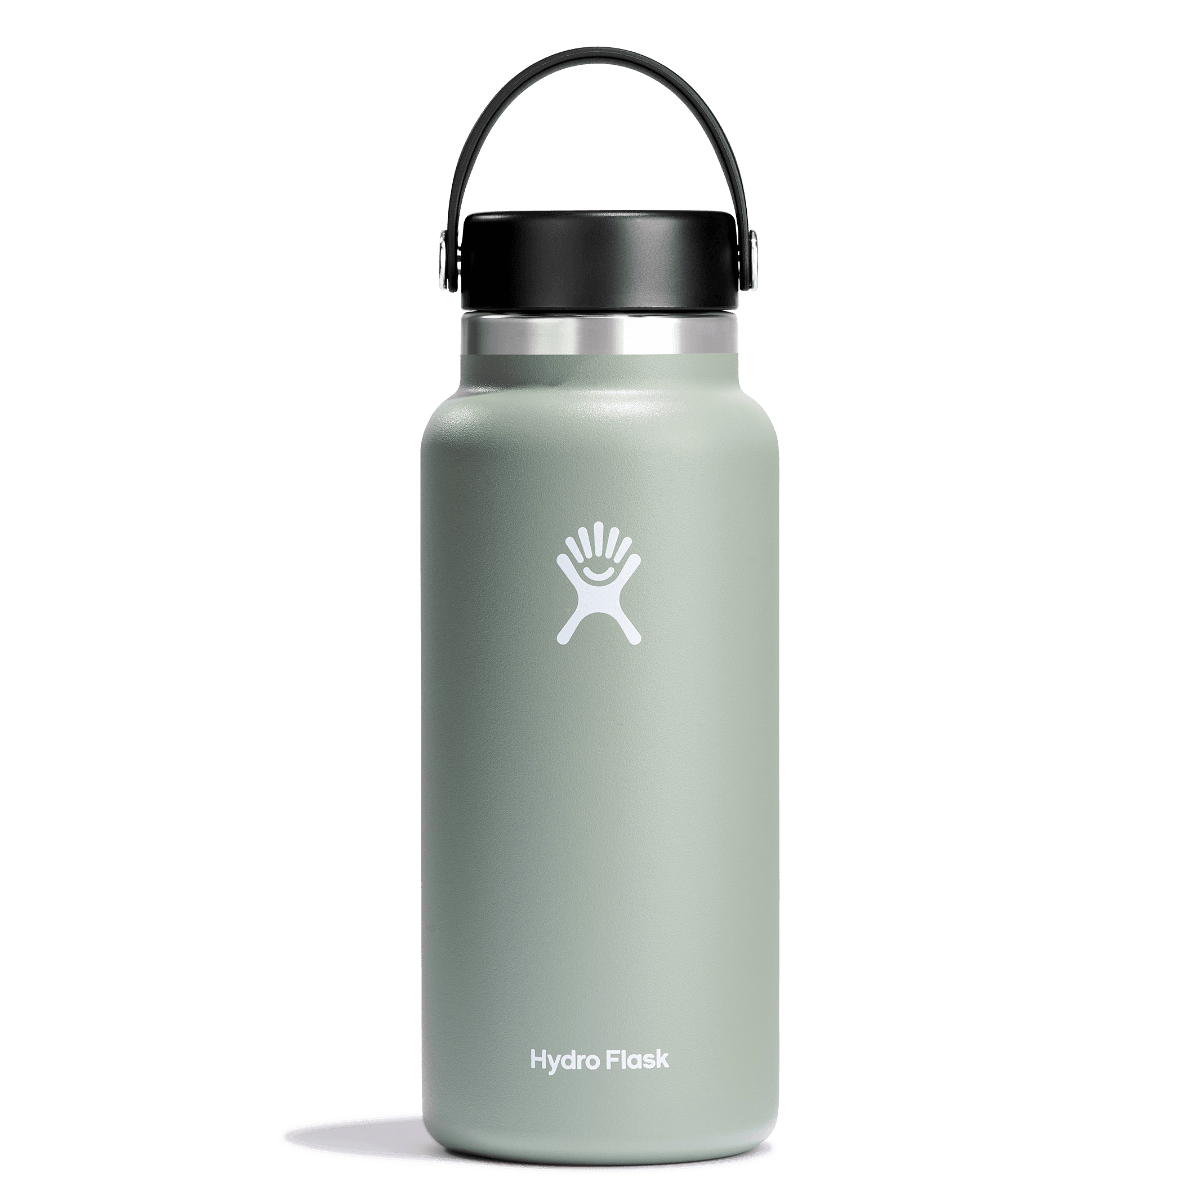 32 oz (946 ml) Wide Mouth Hydro Flask - The Luxury Promotional Gifts Company Limited